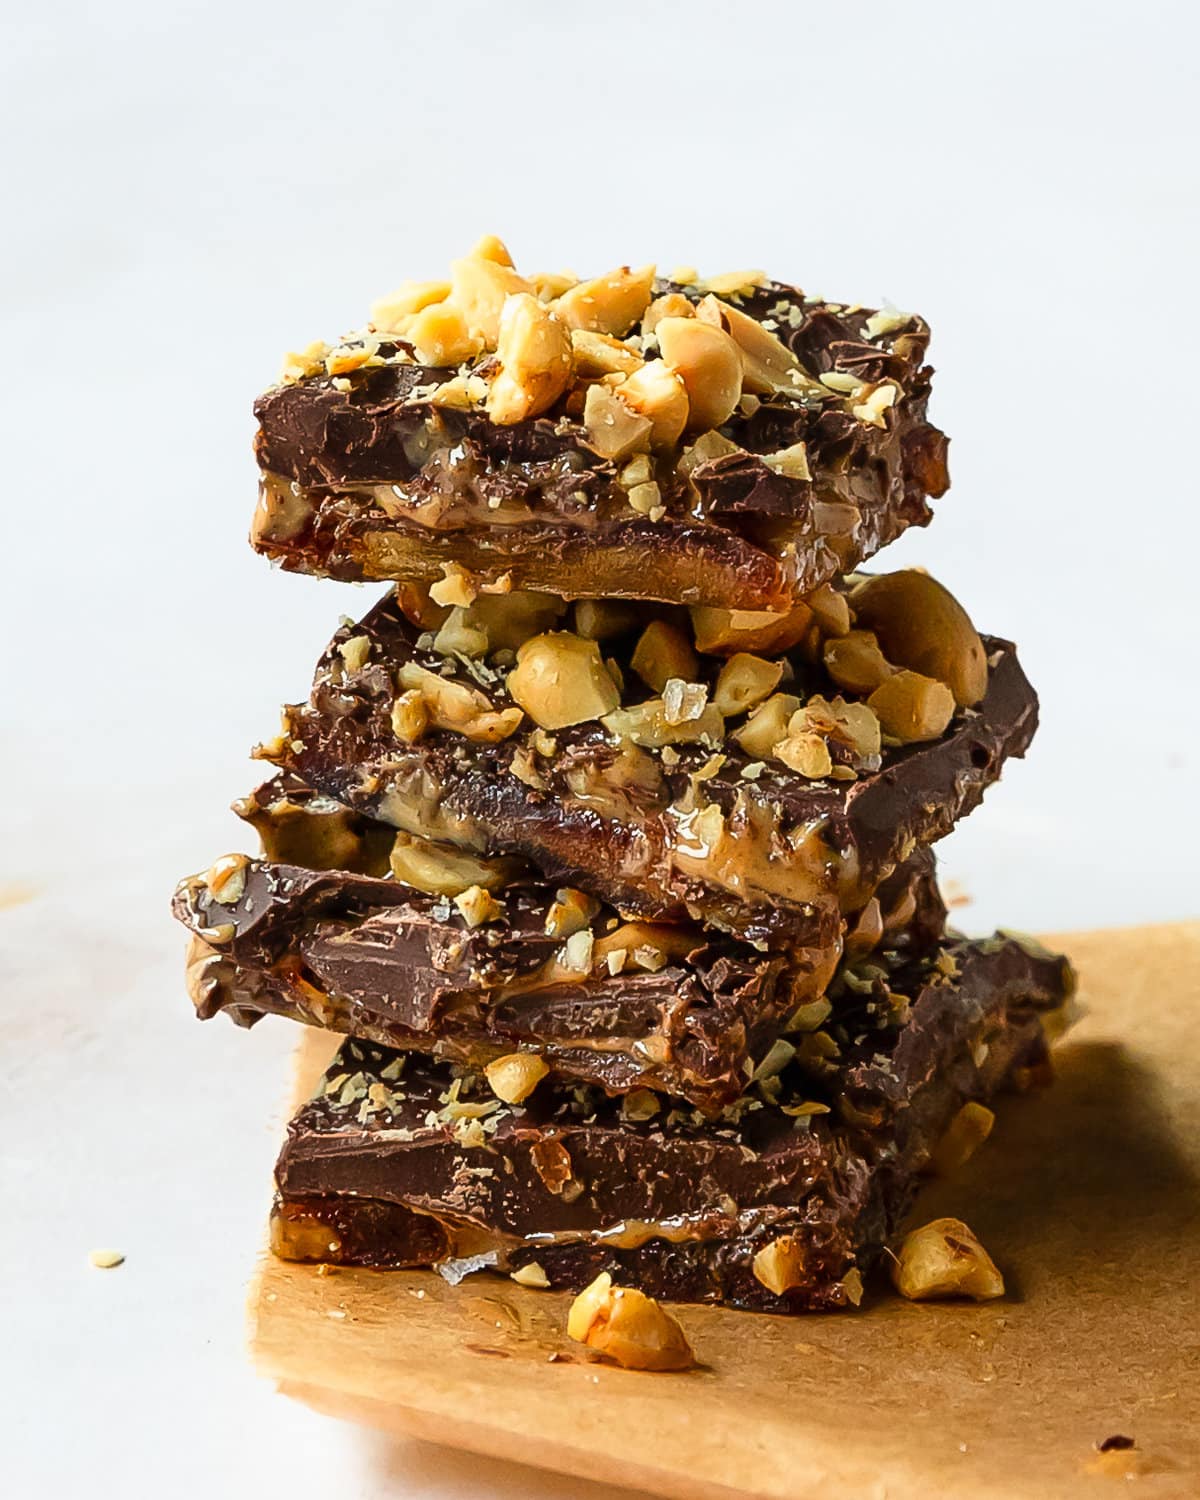 Date snickers is a healthy, sweet and salty treat made using a handful of healthier, better for you ingredients such as medjool dates, peanut butter, melted chocolate and chopped nuts. Whether you choose to make this date snickers recipe as date bark or as stuffed chocolate covered dates, one this is for sure, they’re even better than the snickers candy bar. 